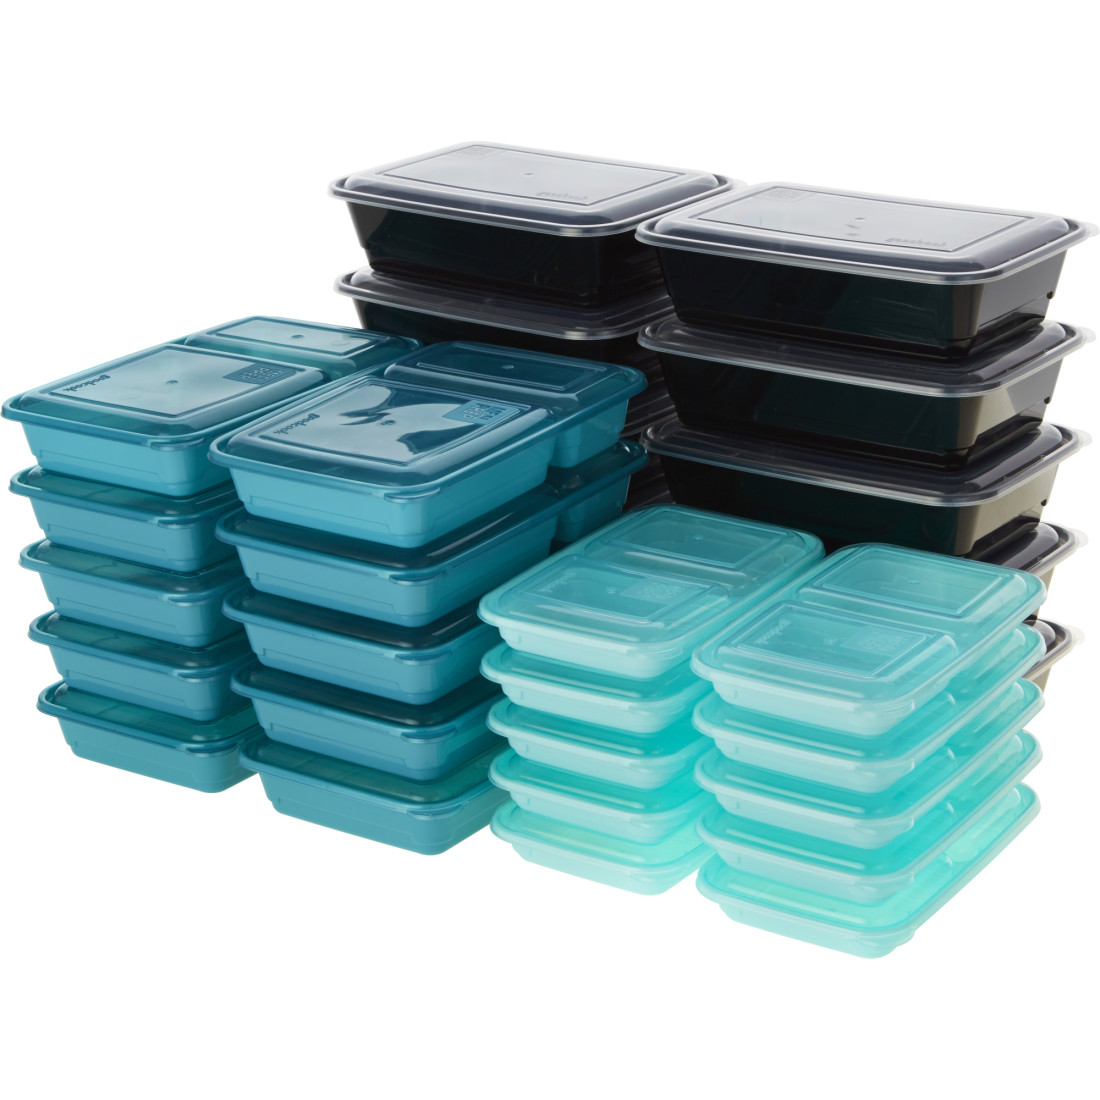 GoodCook Meal Prep Set Food Storage Containers with Lids - 60pc in